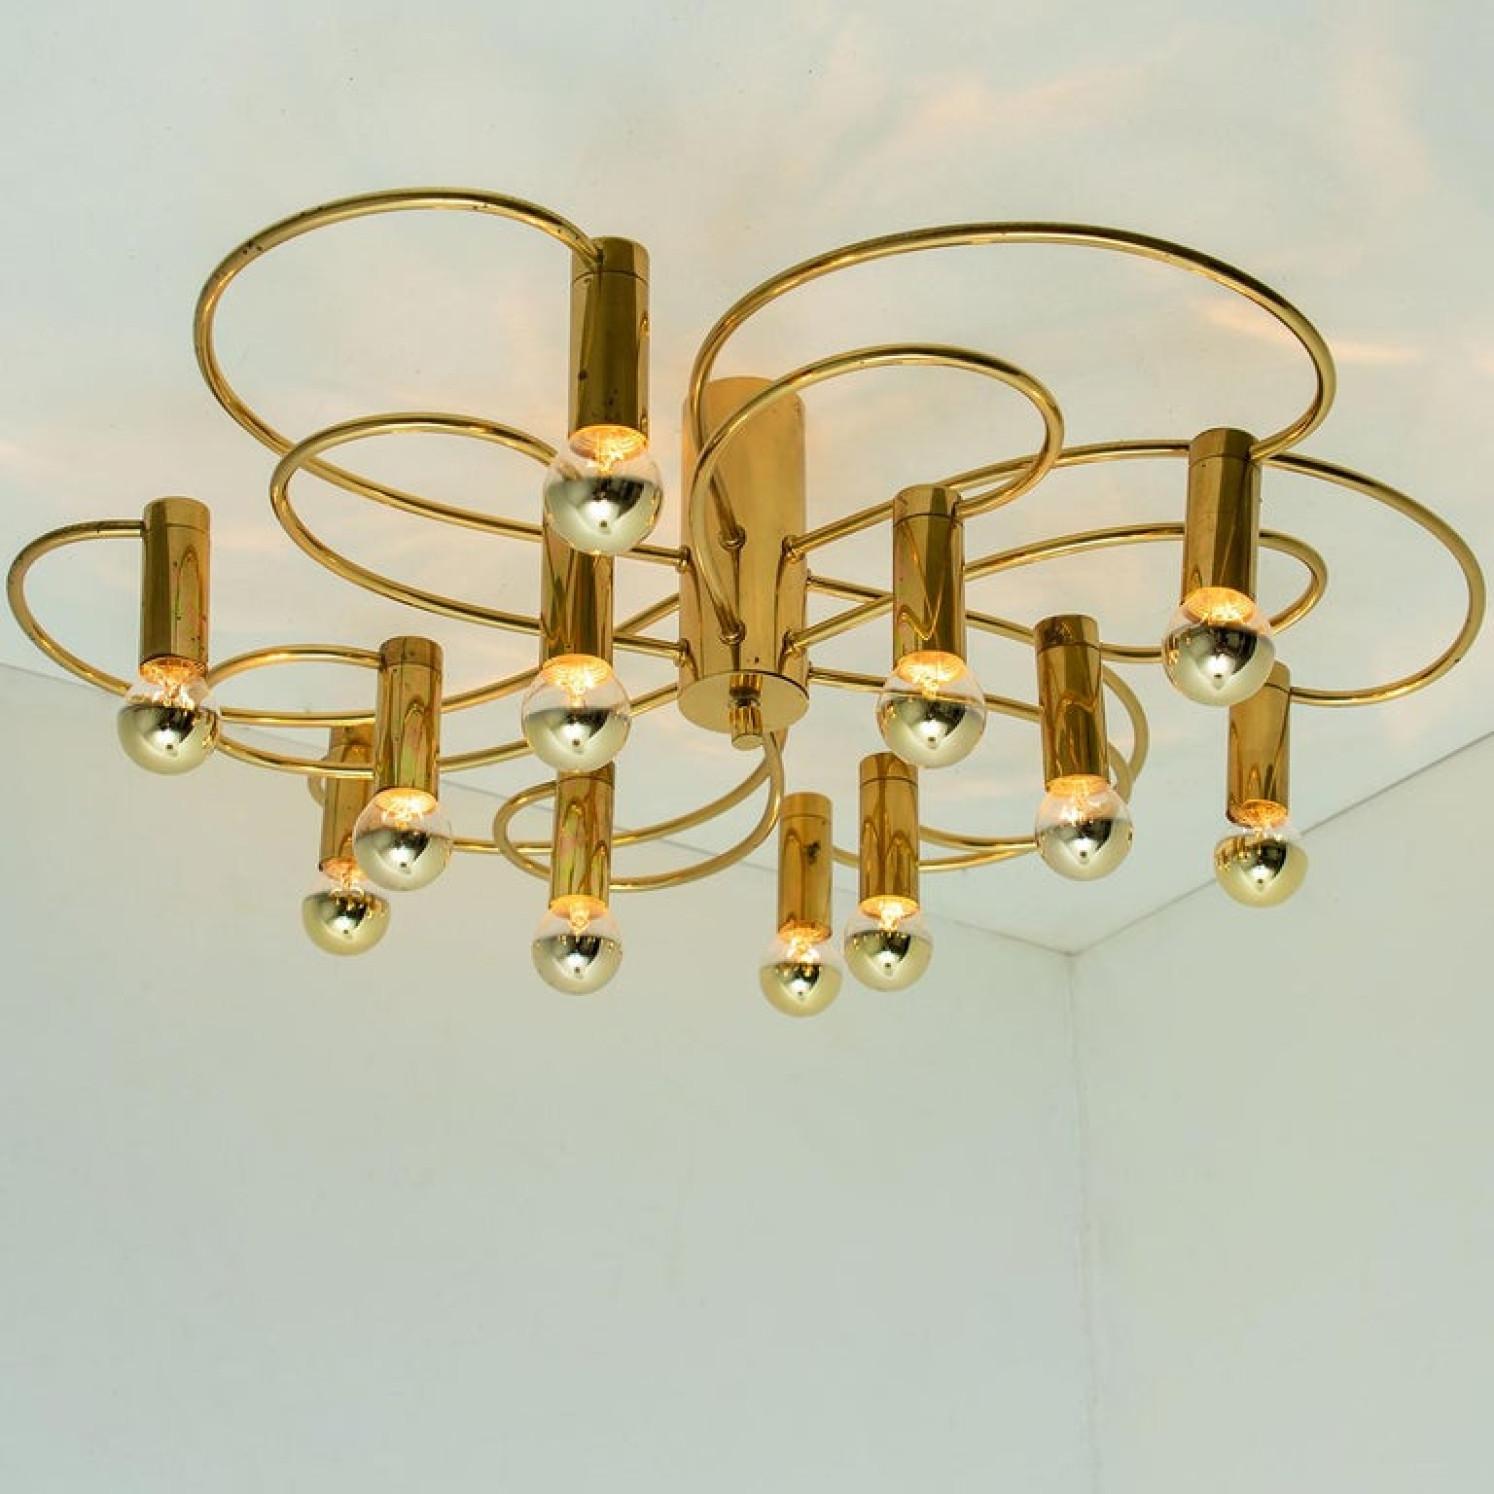 Mid-Century Modern 1 of the 2 Leola Sculptural Brass 13-Light Ceiling or Wall Flush Mount, 1970s For Sale